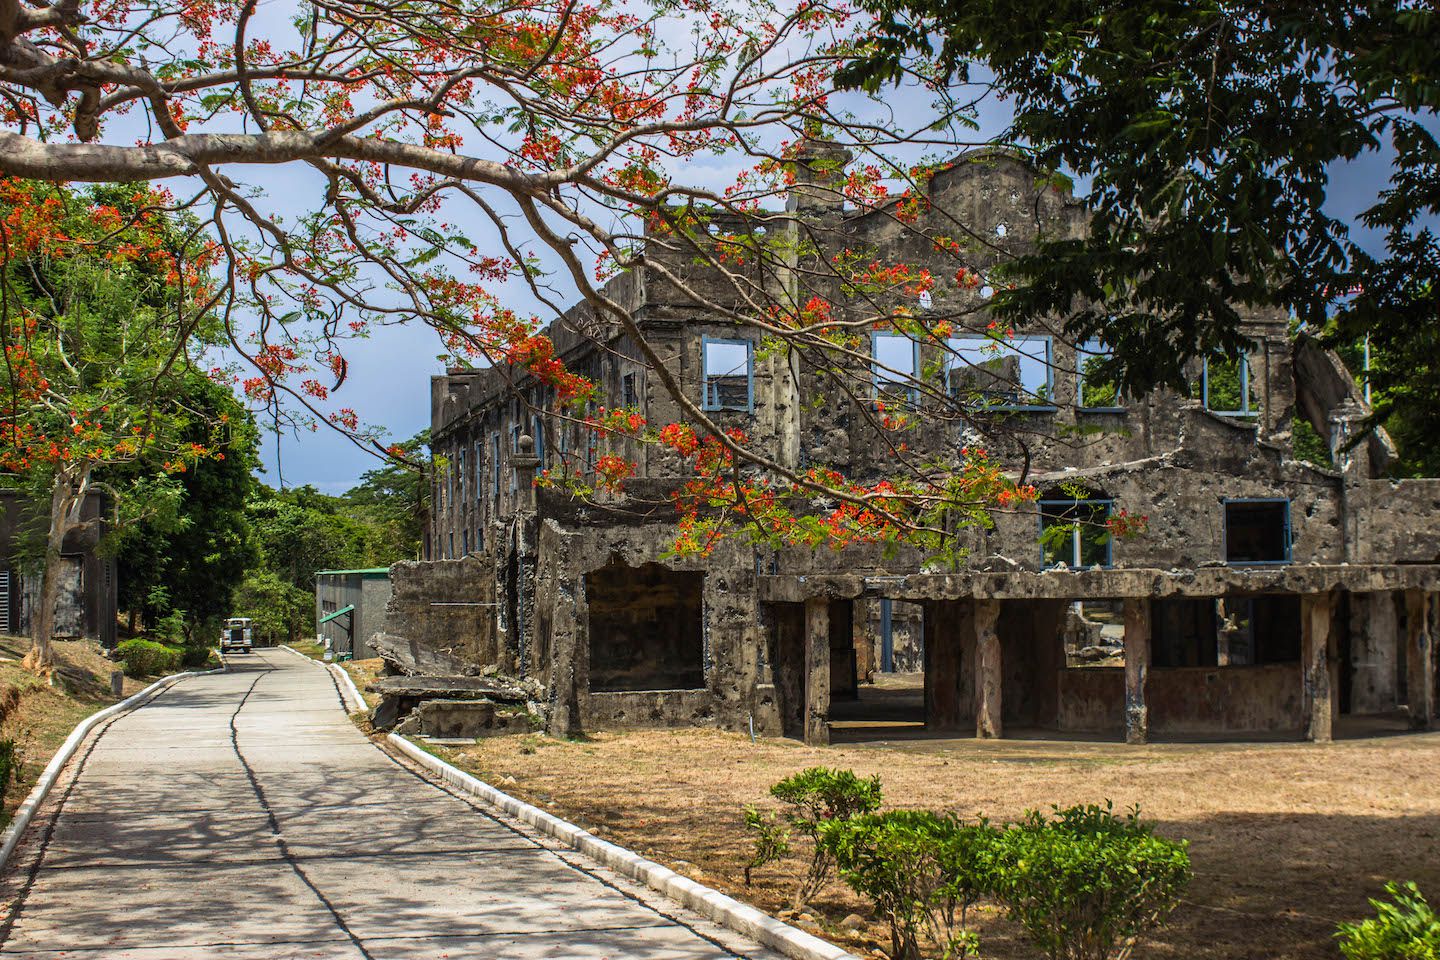 View of the military barracks in the Corregidor Island, Philippines